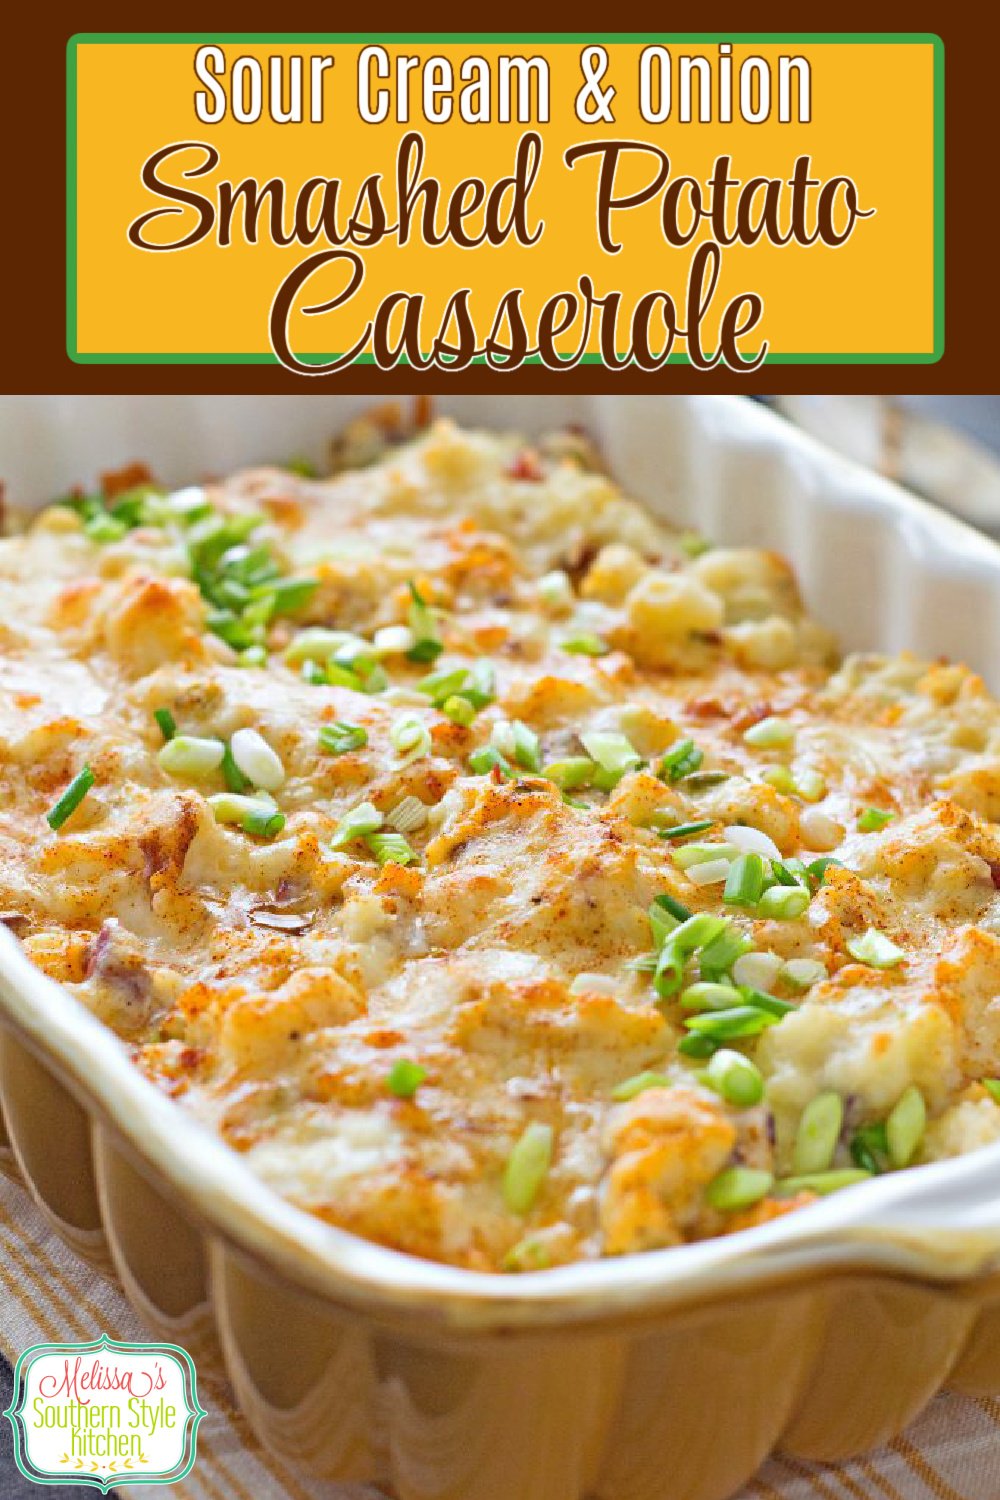 Spud fans will flip for this easy Sour Cream and Onion Smashed Potato Casserole #smashedpotatoes #potatocasserole #sourcreampotatoes #bakedpotatoes #bestpotatorecipes #potatocasserolerecipes #chessypotatoes #southernrecipes #food #recipes #southernfood #easycasseroles #melissassouthernstylekitchen #potatoes via @melissasssk